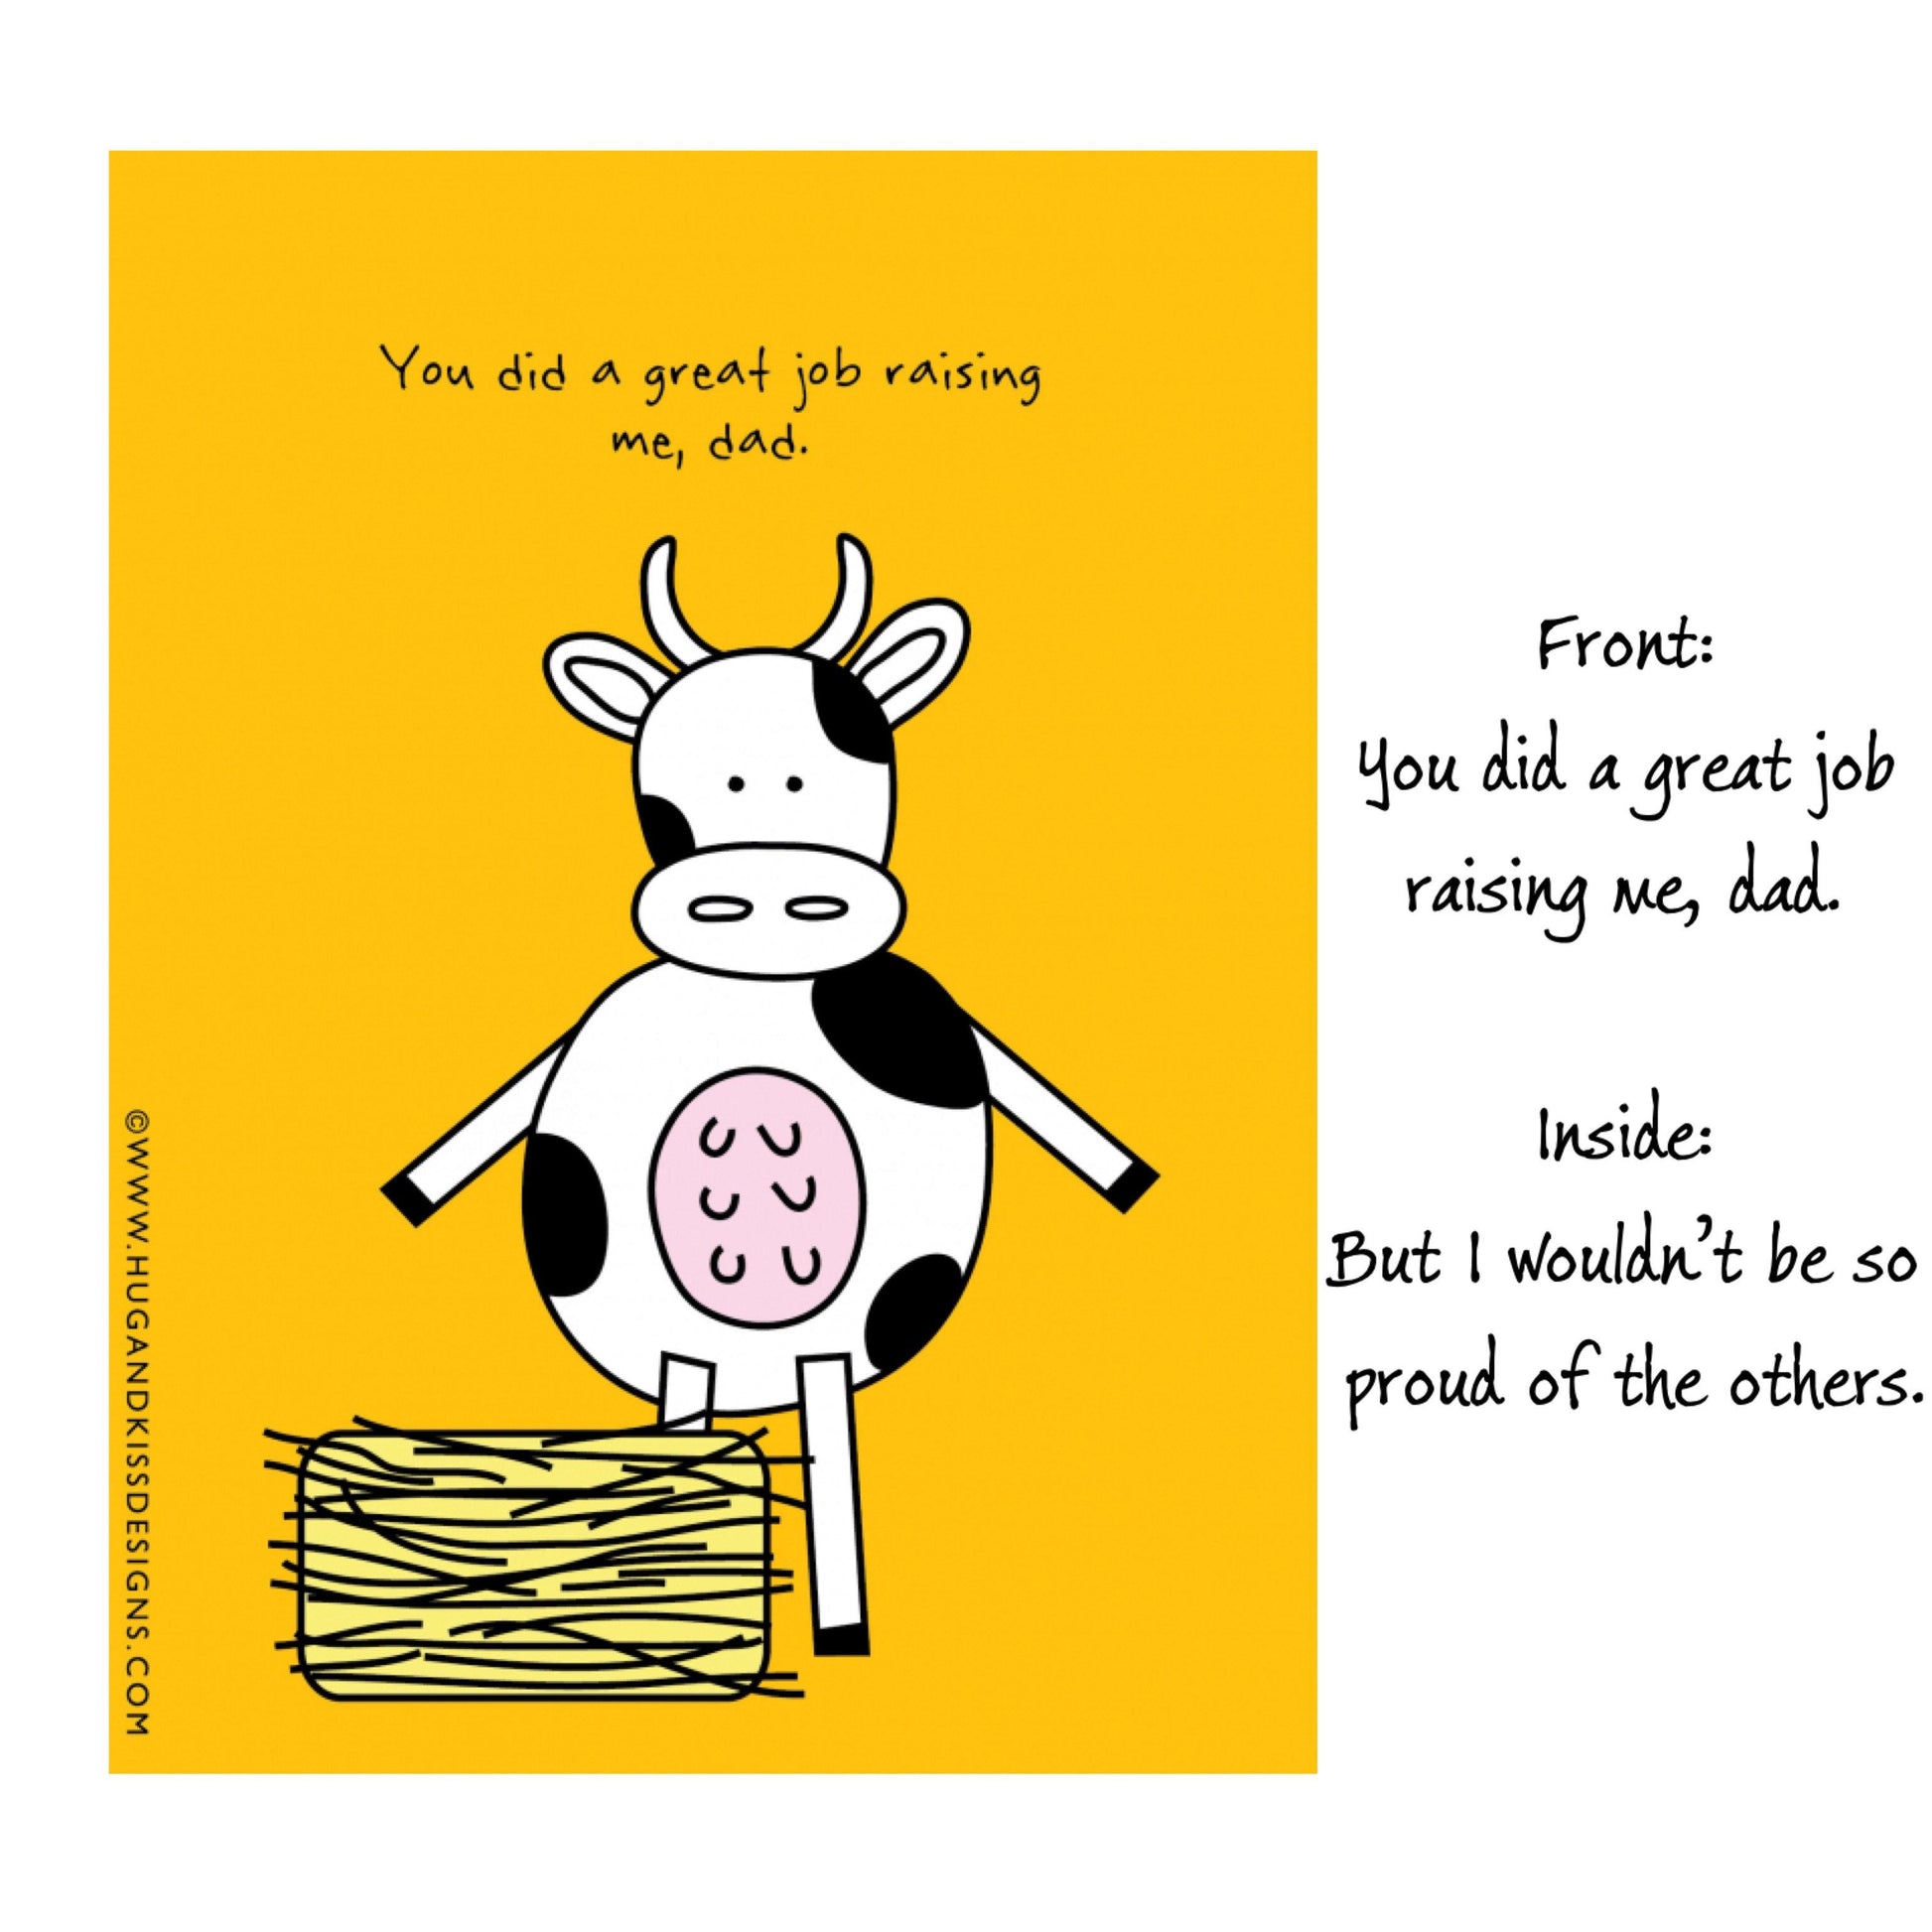 Cheeky Father’s Day Cards - TWB Home Decor